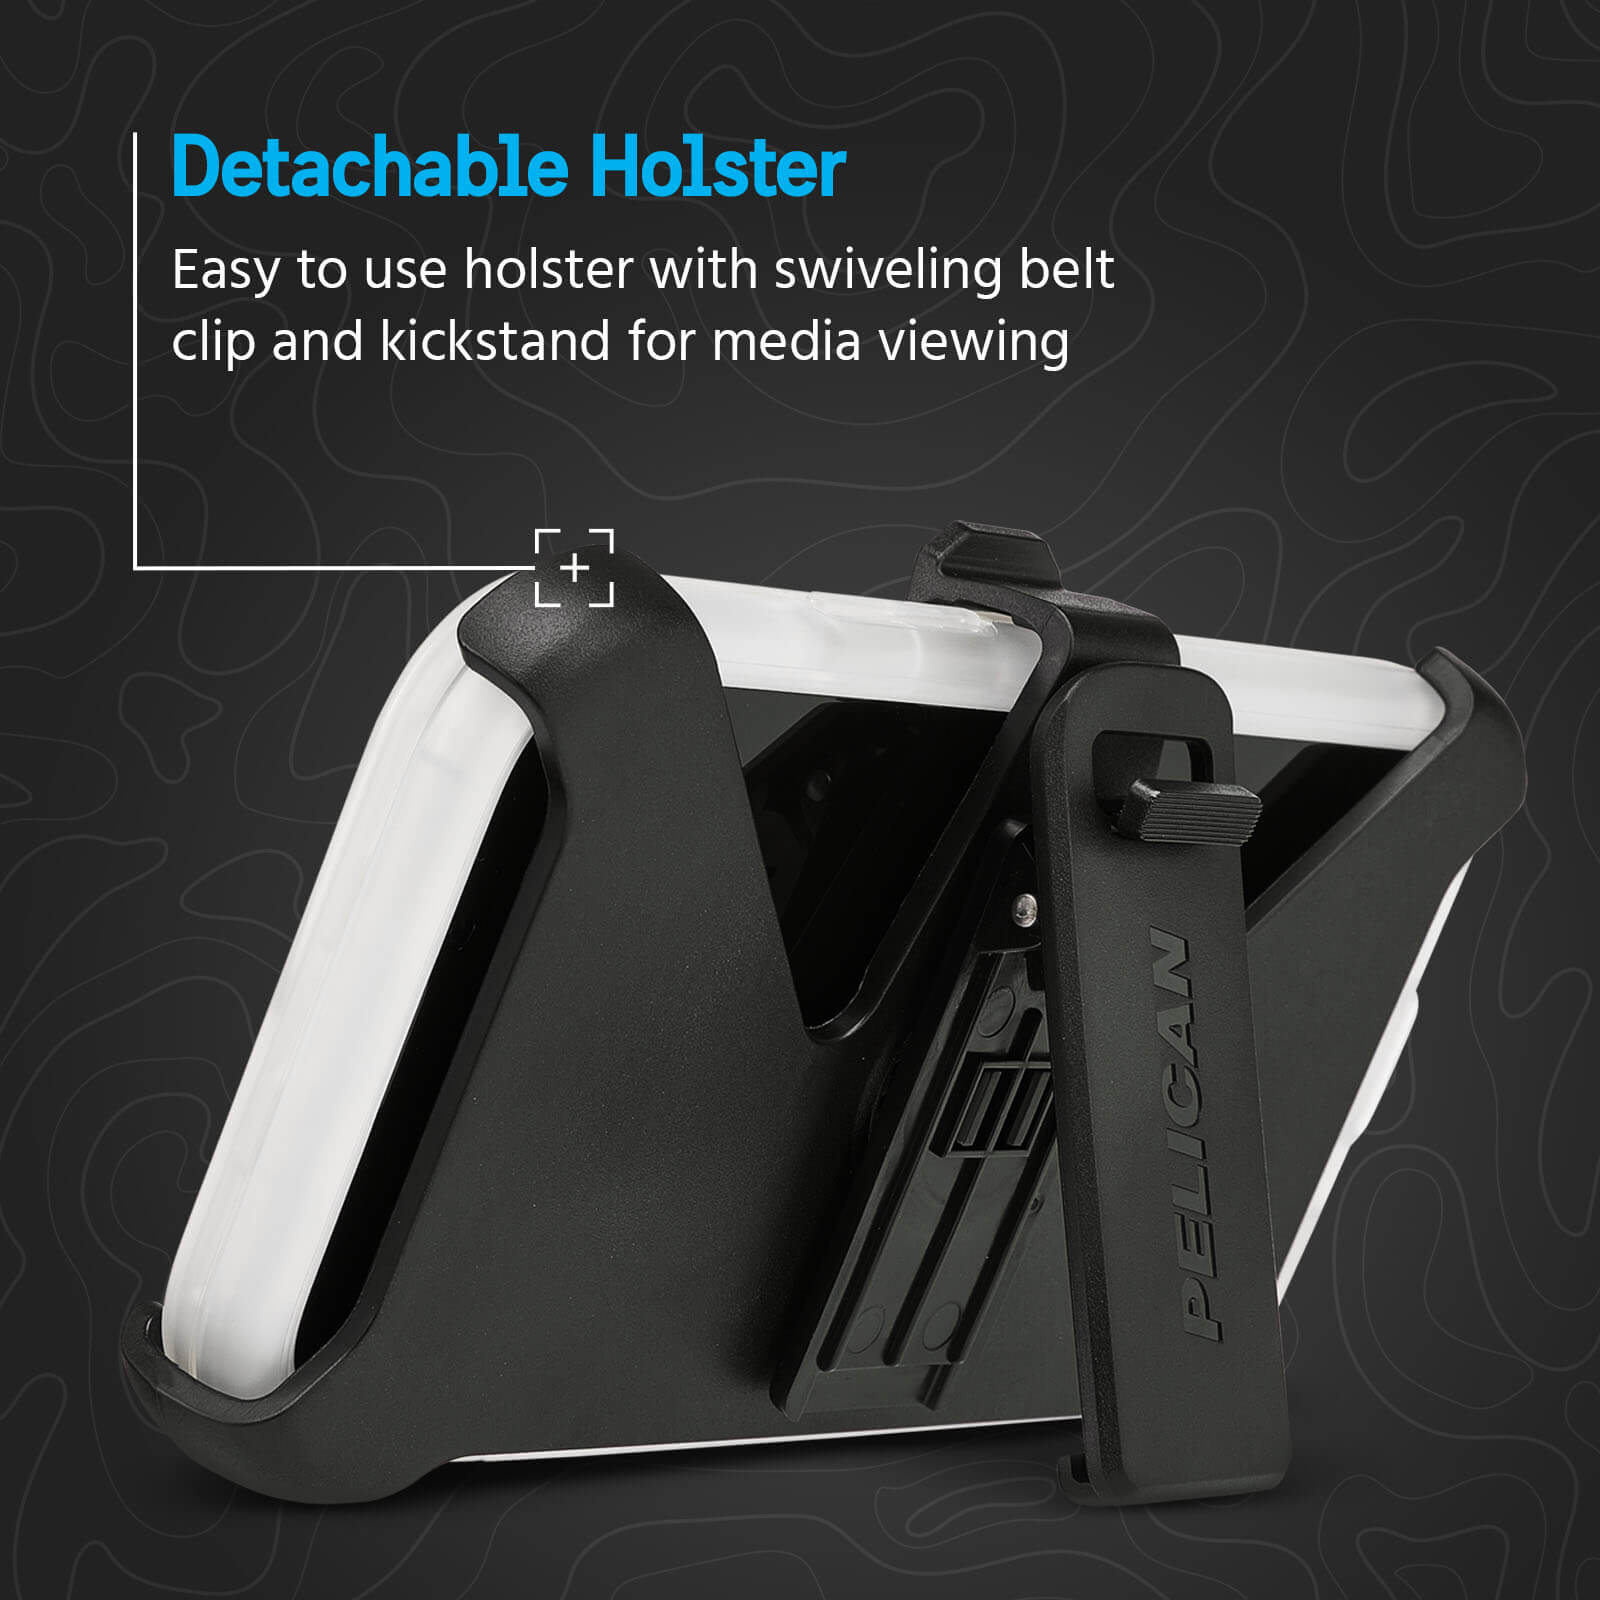 Detachable holster. Easy to use holster with a swiveling belt clip and kickstand for media viewing. color::Clear